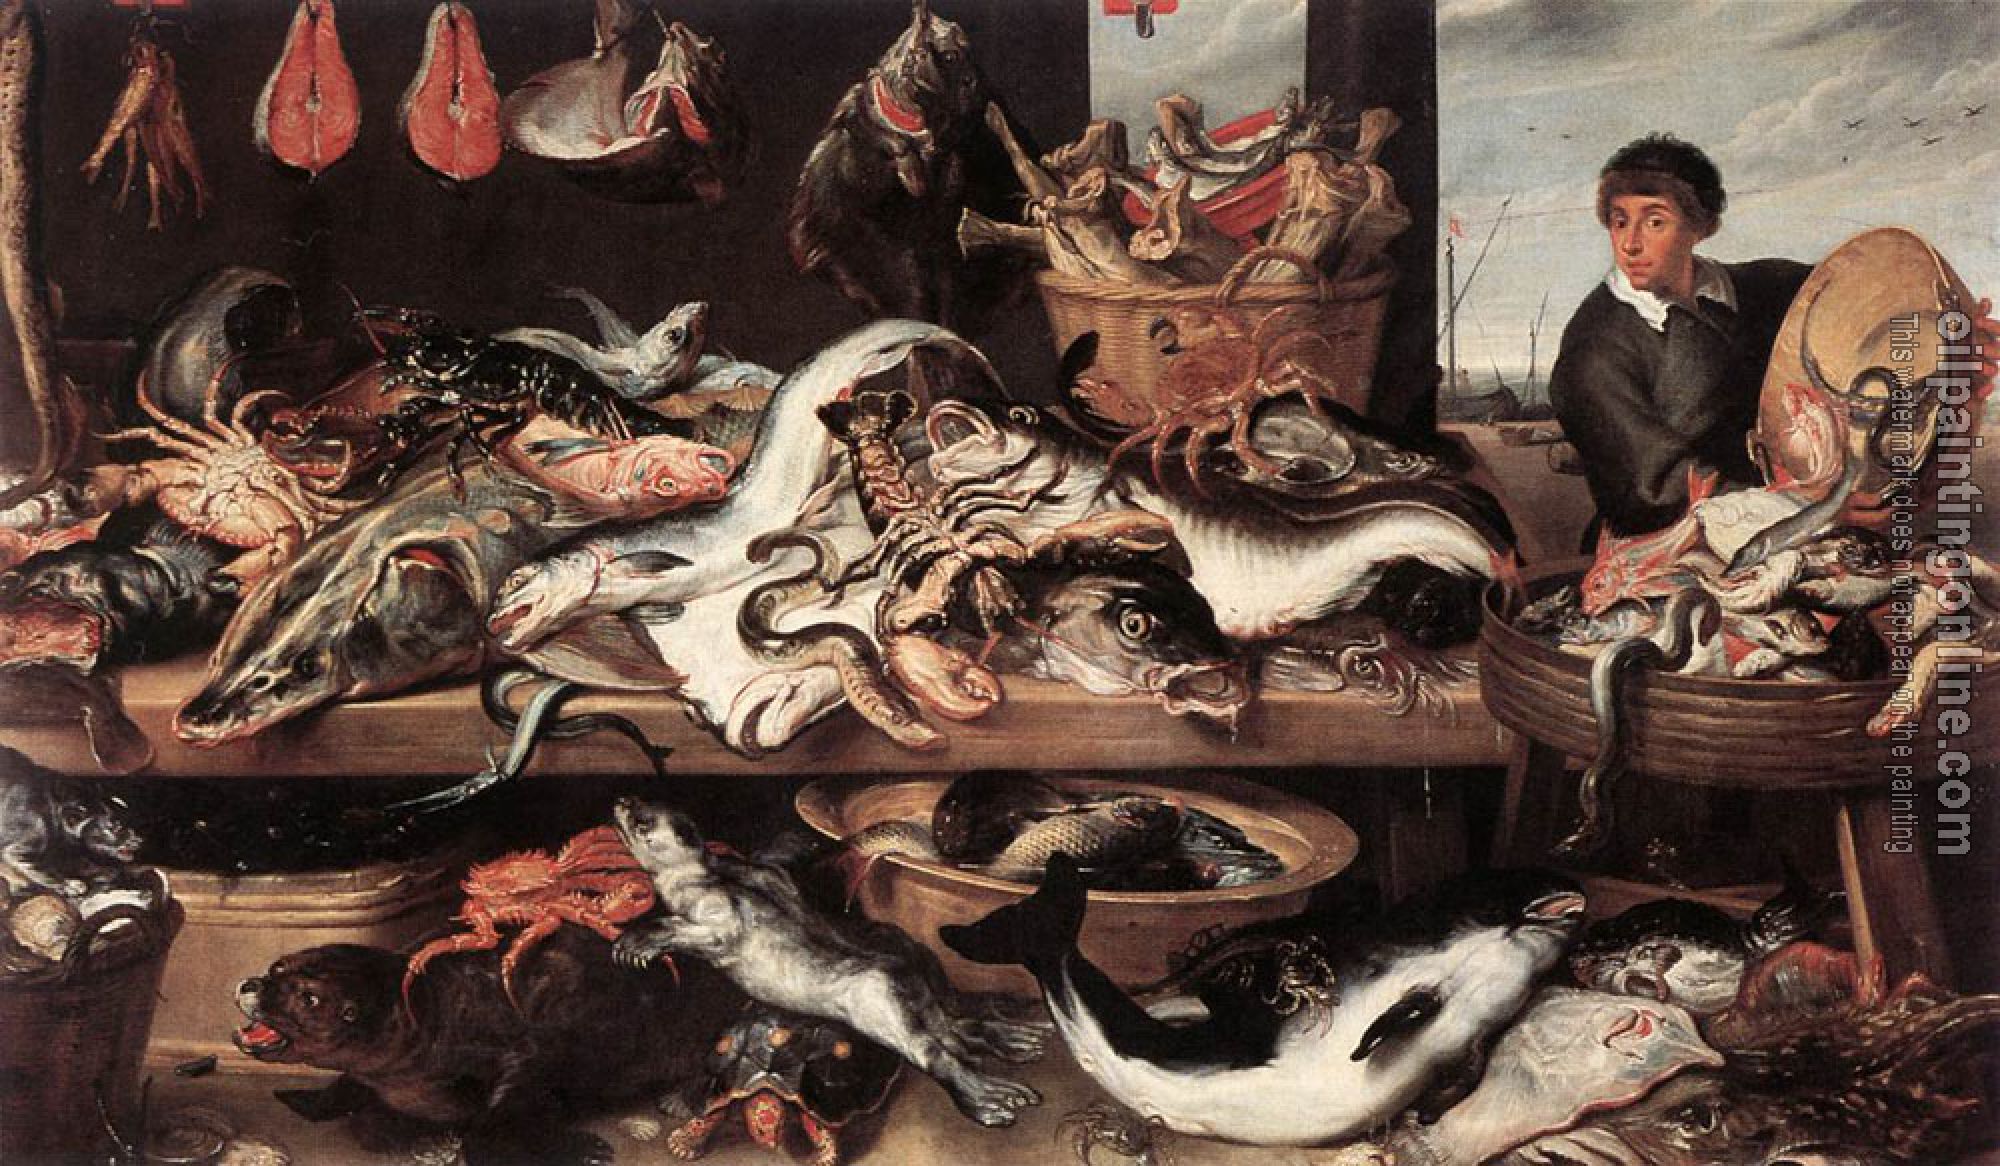 Frans Snyders - Fishmongers